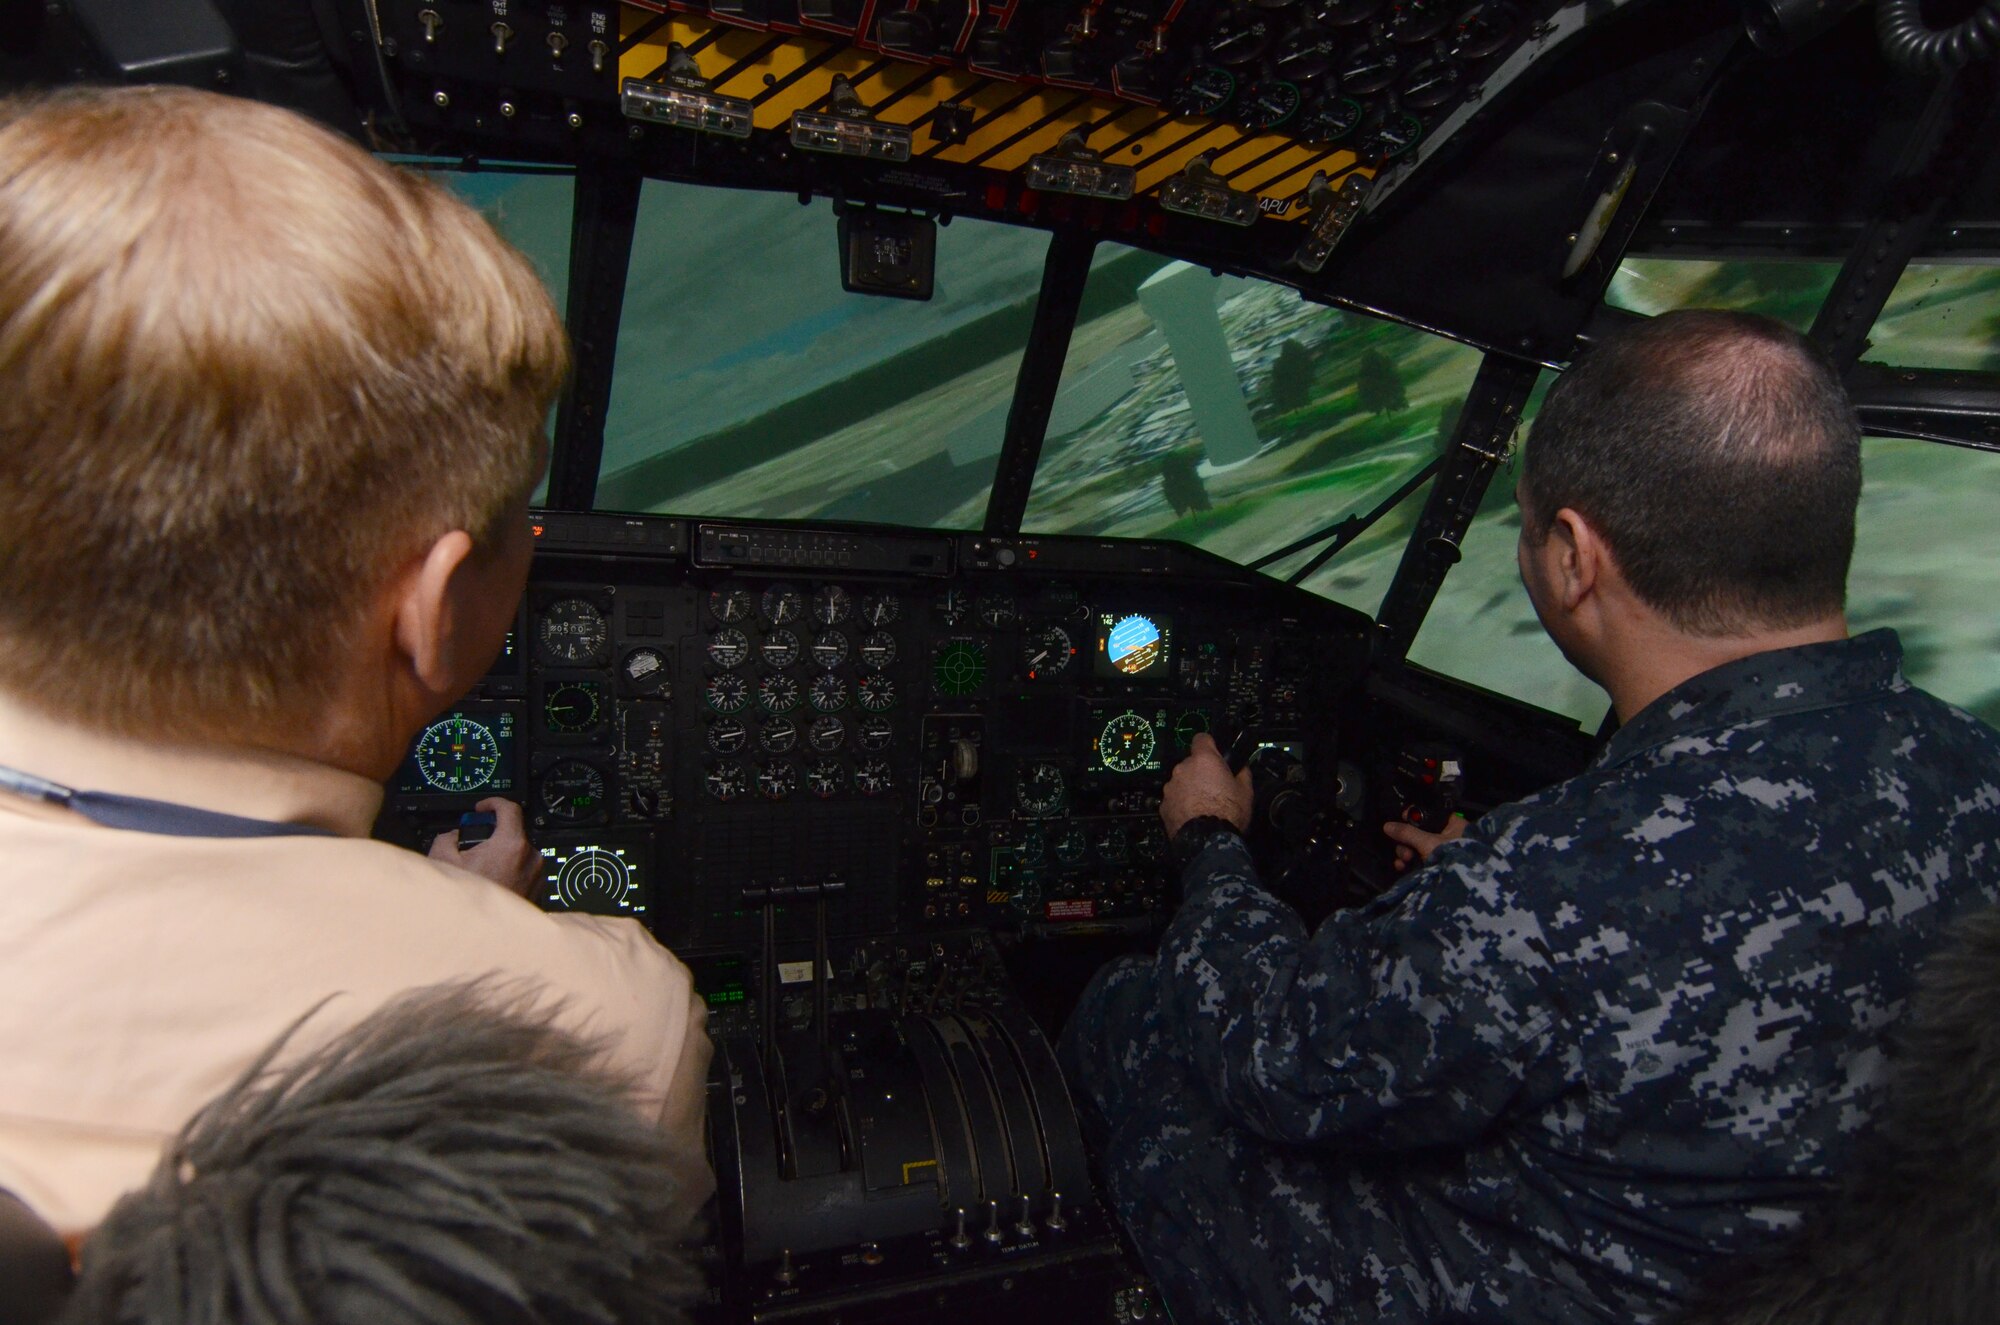 Members of the Honorary Commanders Association receive hands –on experience while getting the opportunity to fly a C-130 flight simulator during Dobbins Day, while touring Dobbins Air Reserve Base, Ga. Feb. 12, 2016. (U.S. Air Force photo/Don Peek)